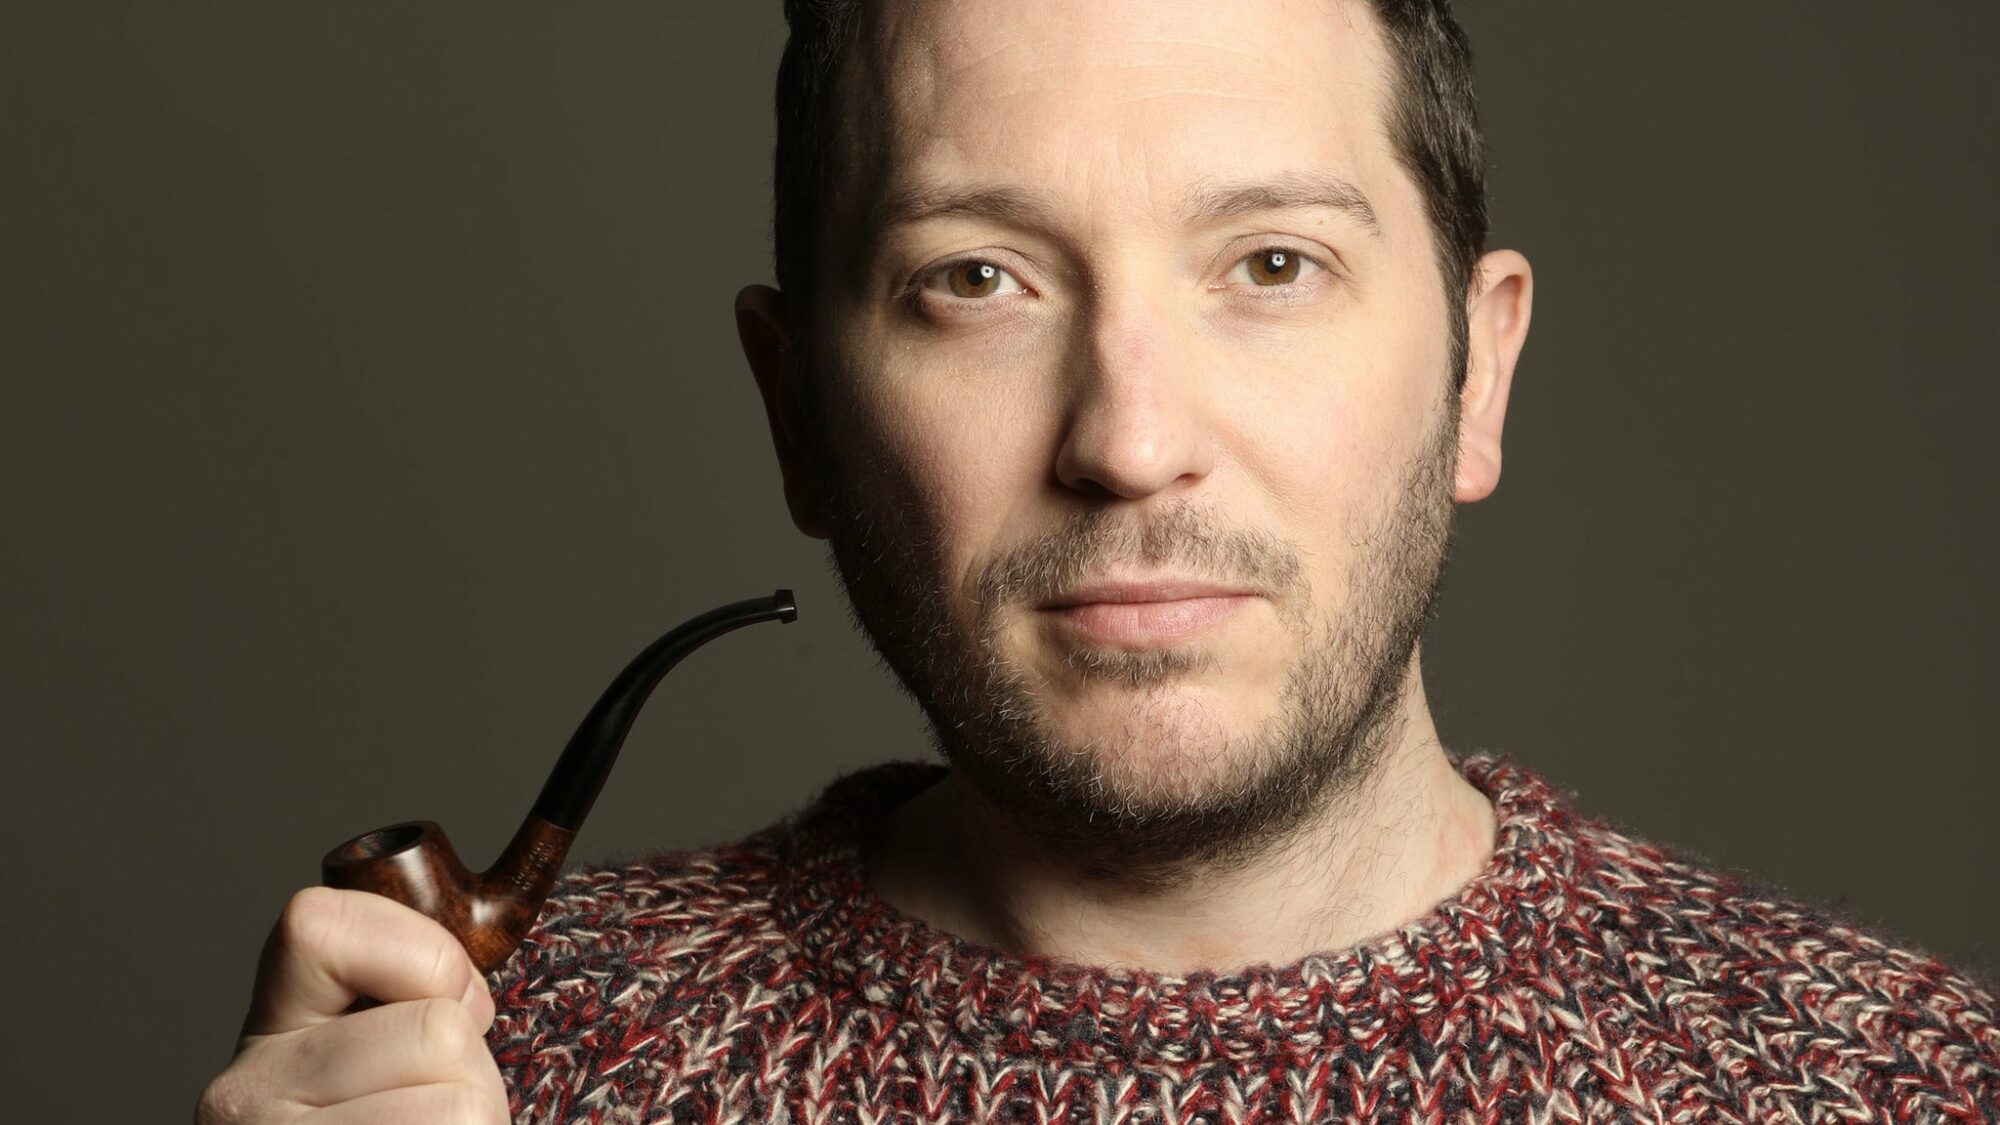 Image name Jon Richardson The Knitwit at Leeds Grand Theatre Leeds the 1 image from the post Jon Richardson: The Knitwit at Leeds Grand Theatre, Leeds in Yorkshire.com.